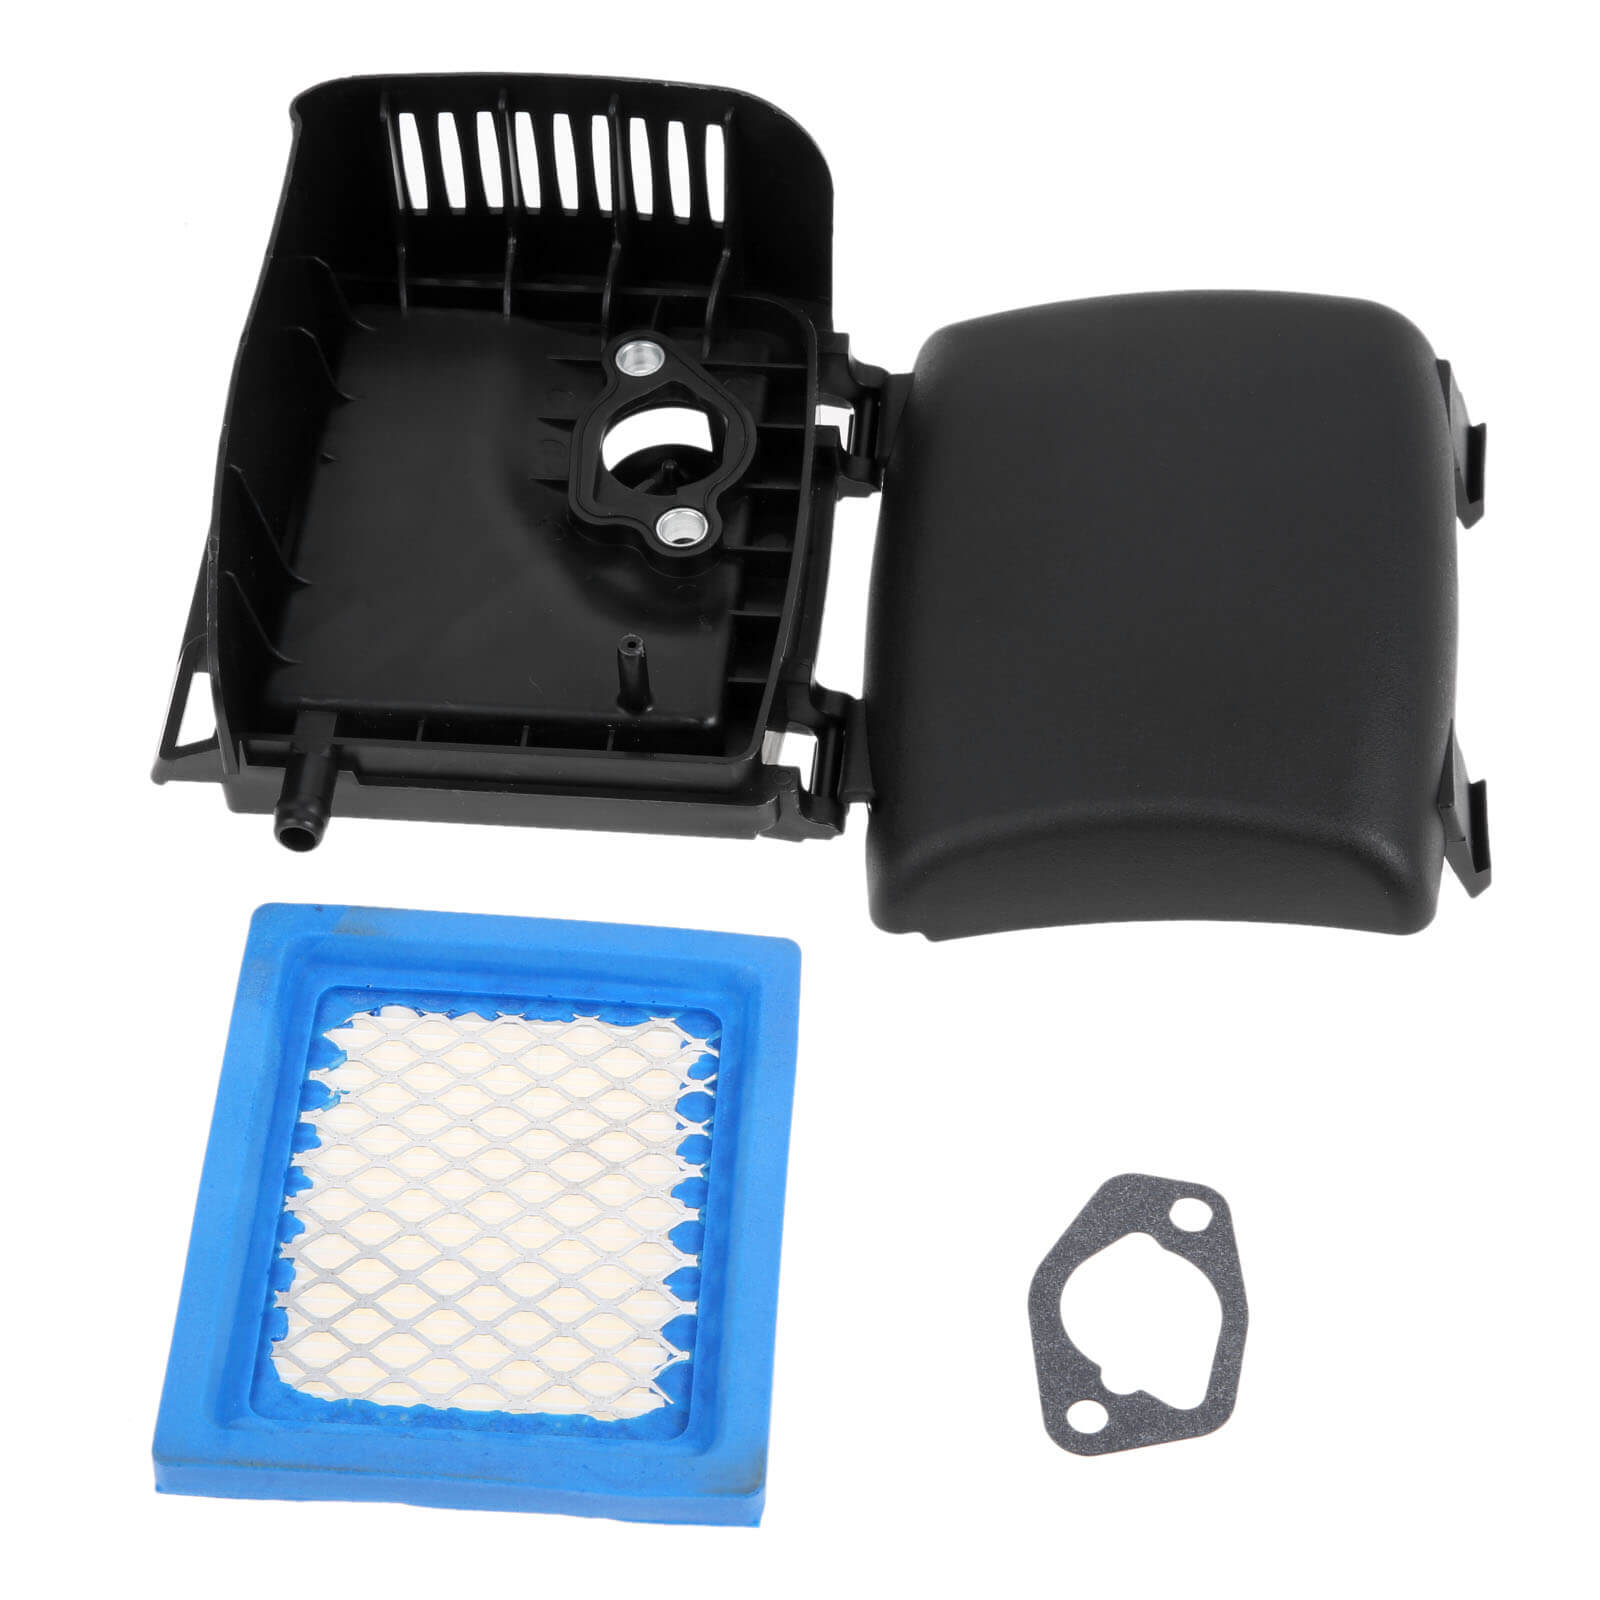 Replaces Air Filter Cover For Toro Model 20377 Lawn Mower